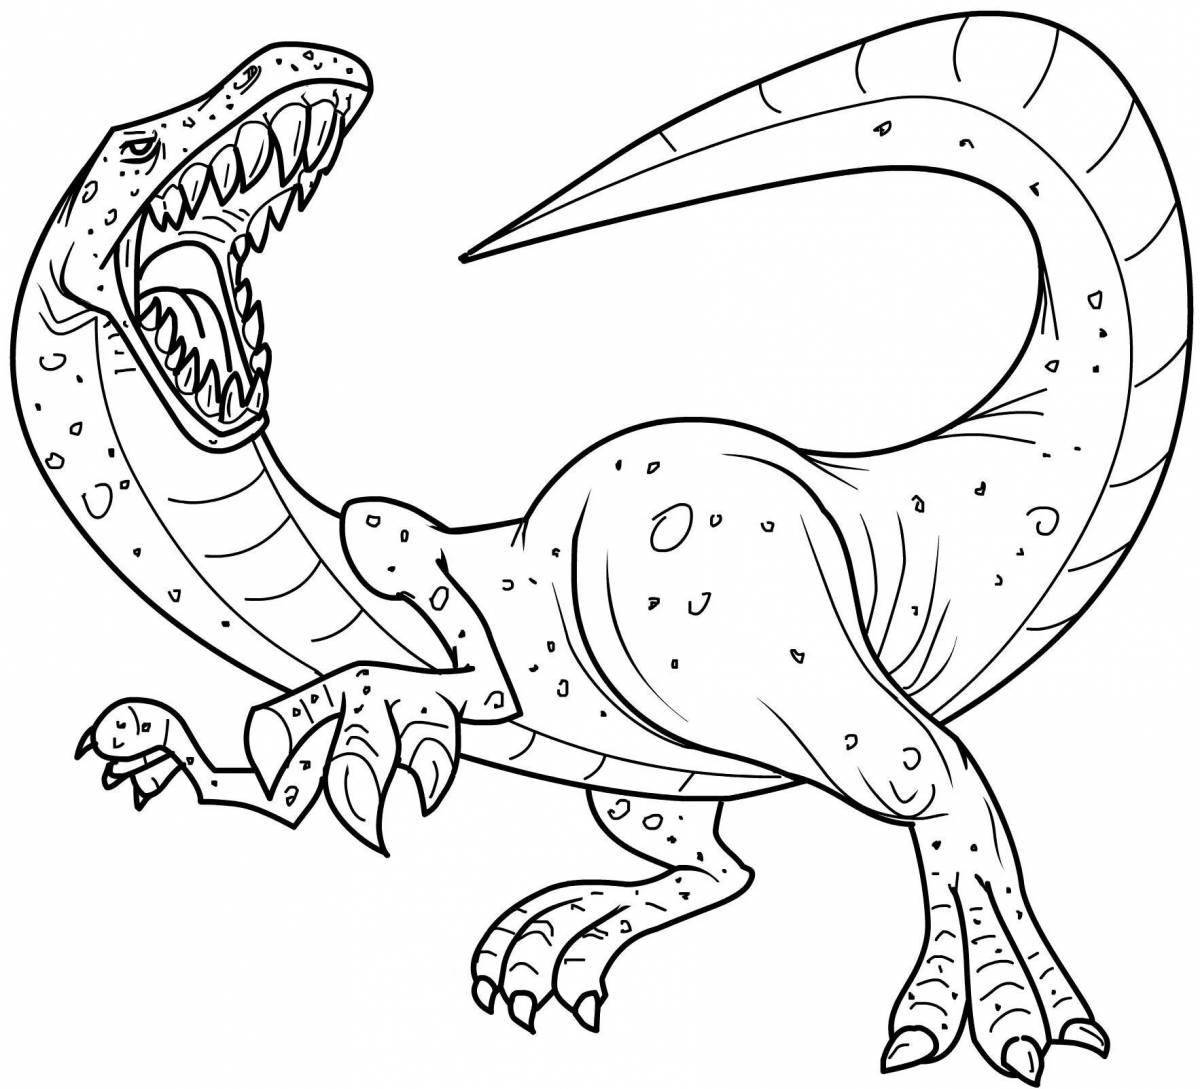 Dinosaur fun coloring book for 6-7 year old boys